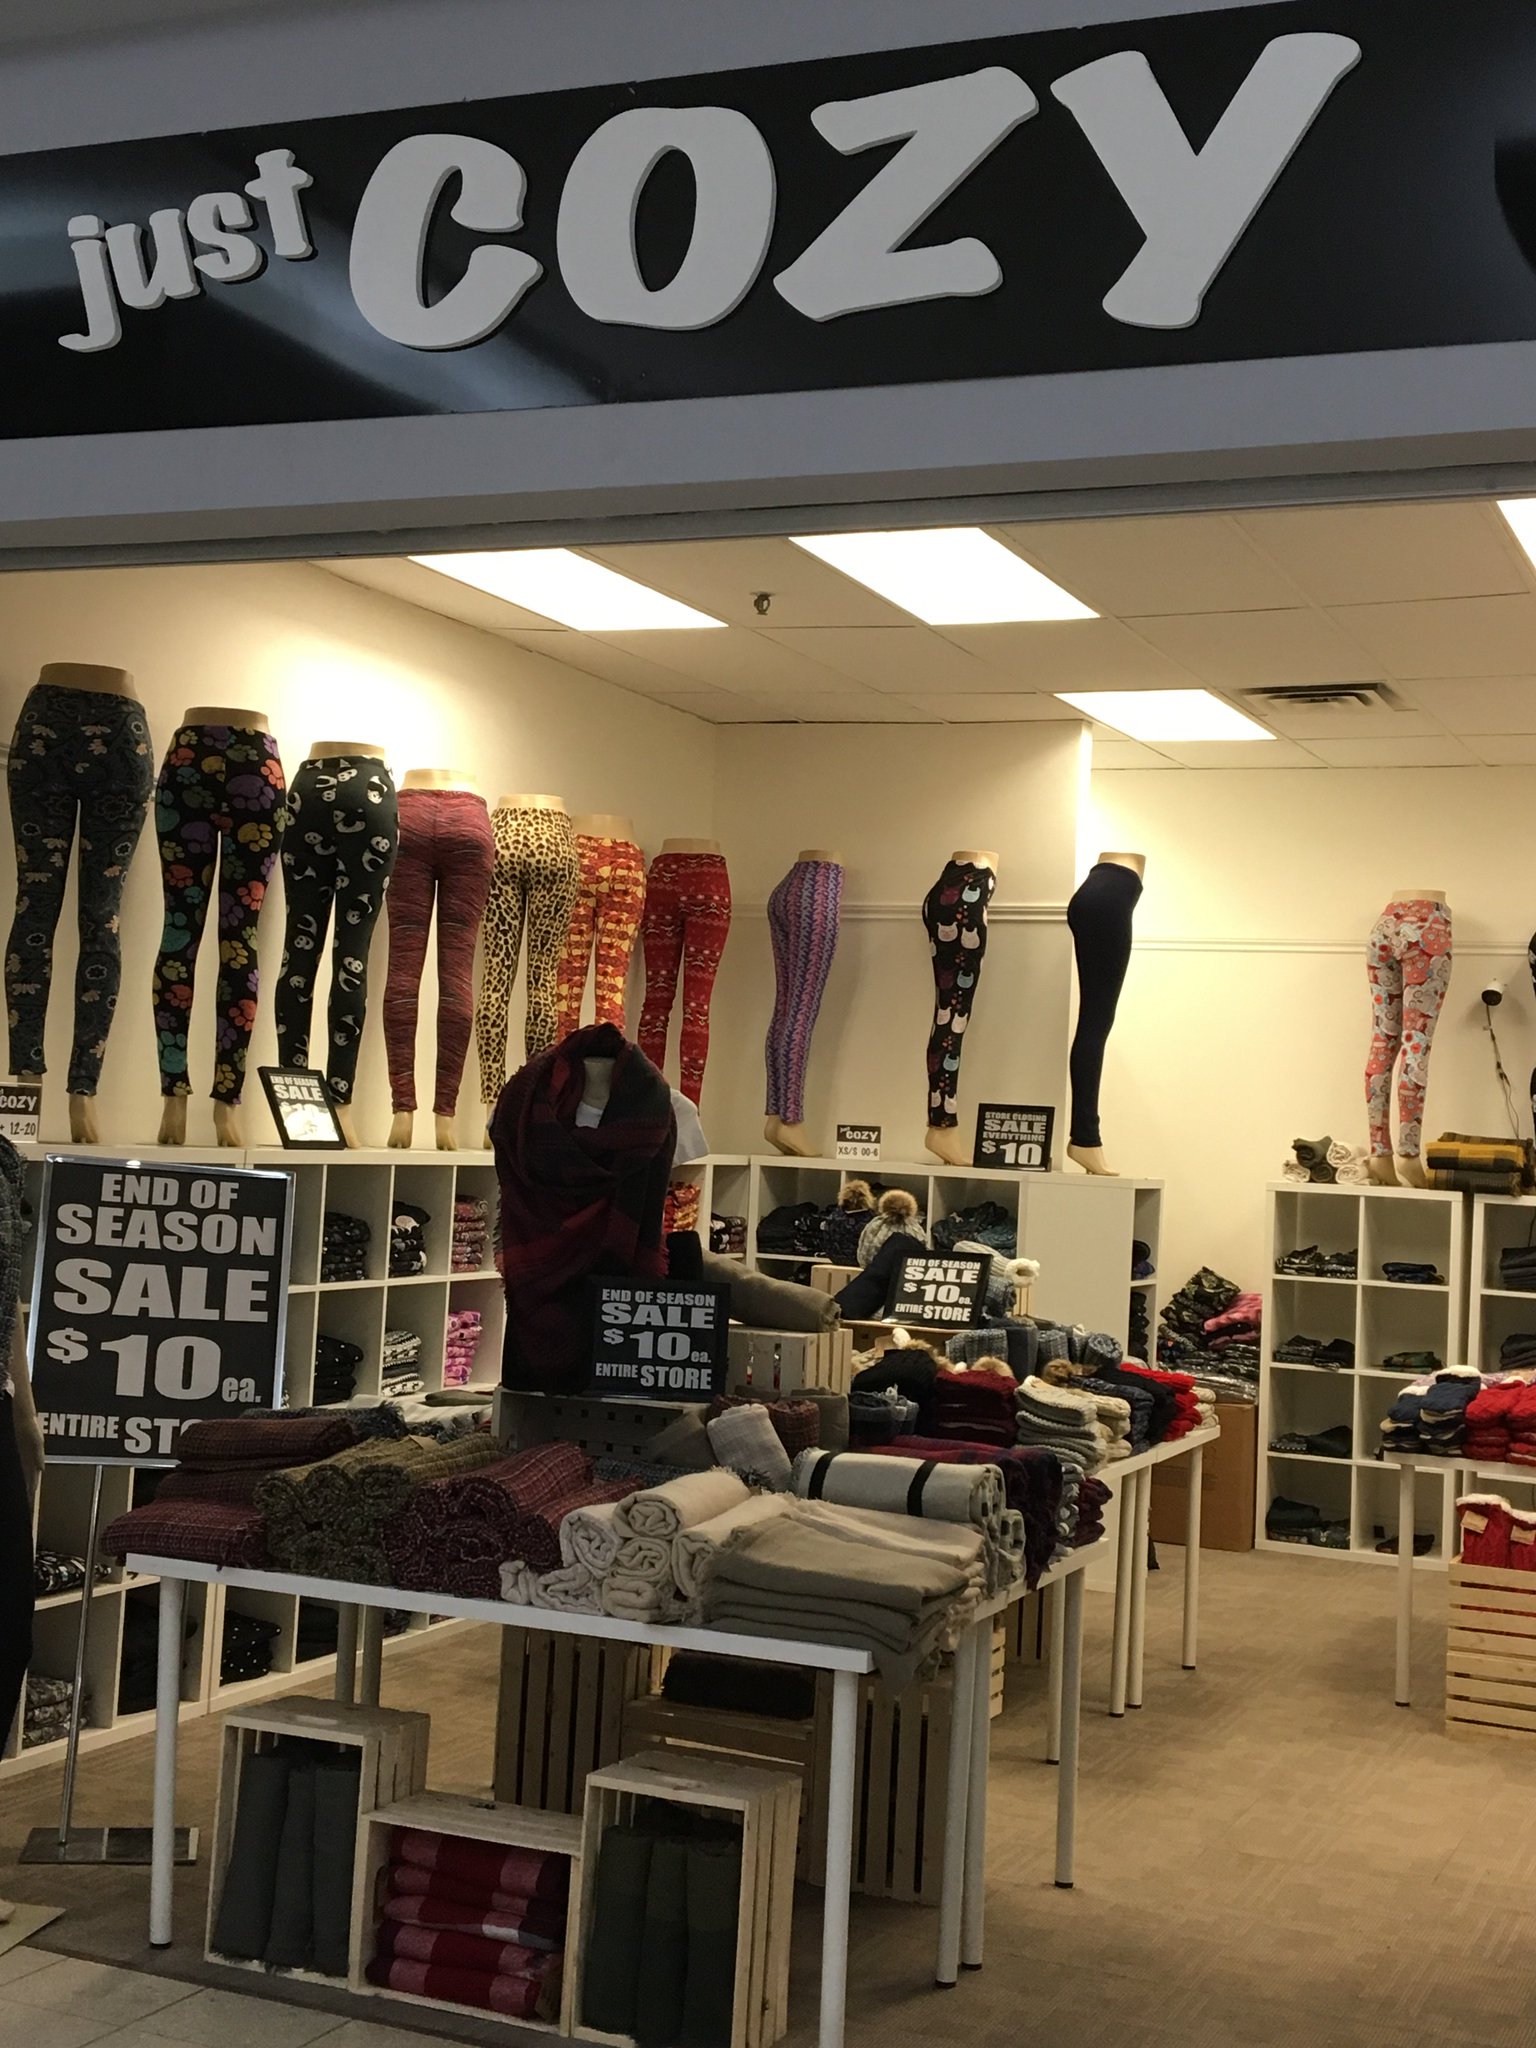 Prairie Mall on X: Just Cozy will be closing January 16th. Hurry in and  take advantage of some cozy deals!!! Entire store is on sale for $10!!!   / X